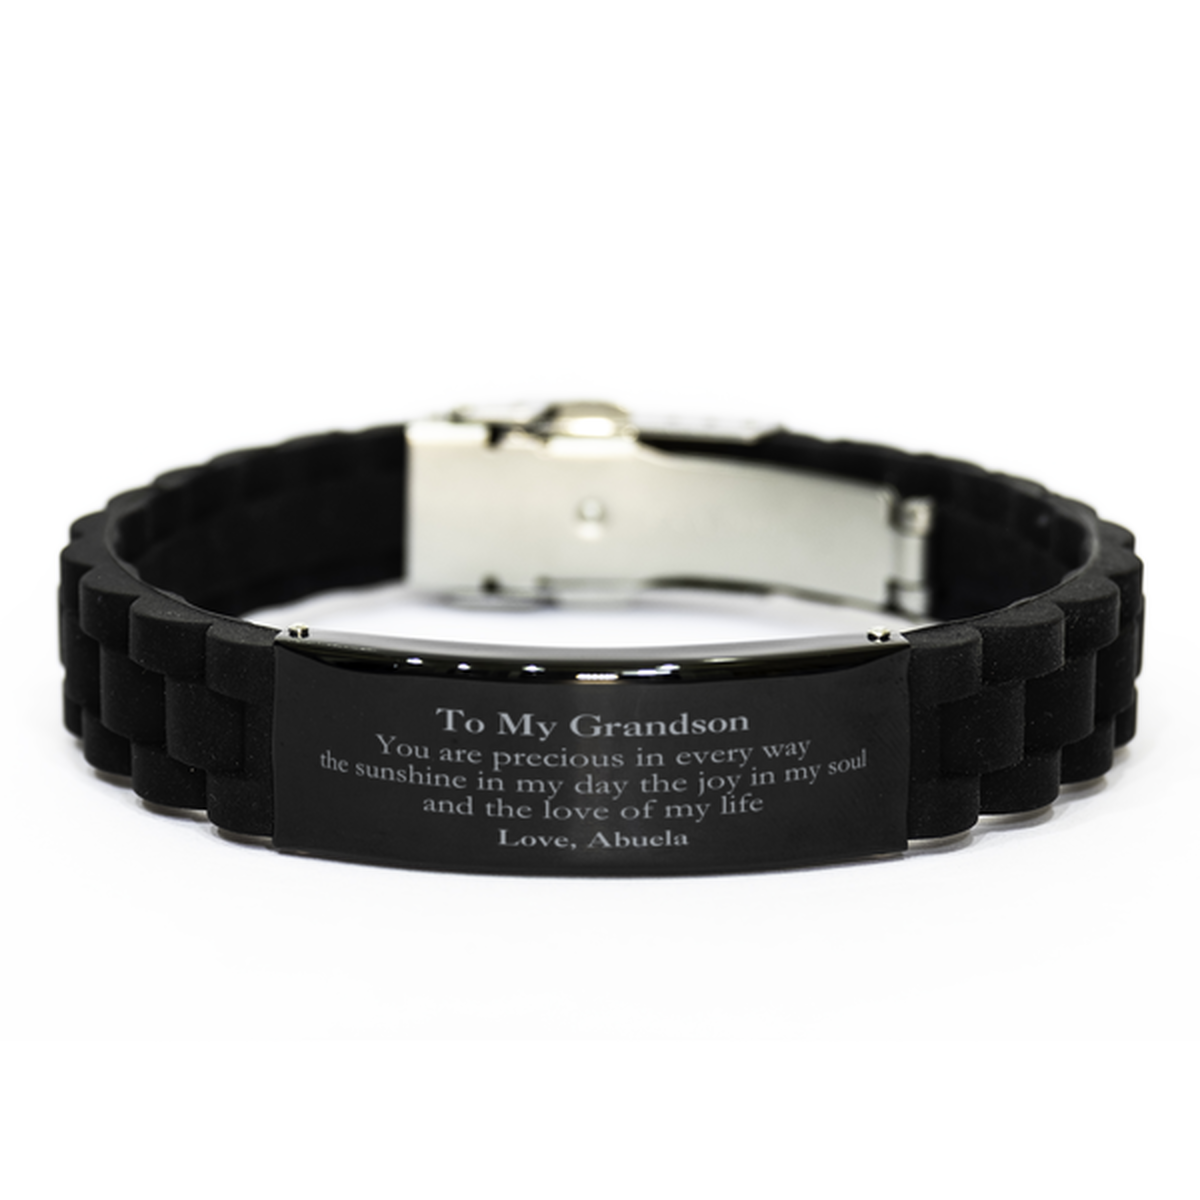 Graduation Gifts for Grandson Black Glidelock Clasp Bracelet Present from Abuela, Christmas Grandson Birthday Gifts Grandson You are precious in every way the sunshine in my day. Love, Abuela